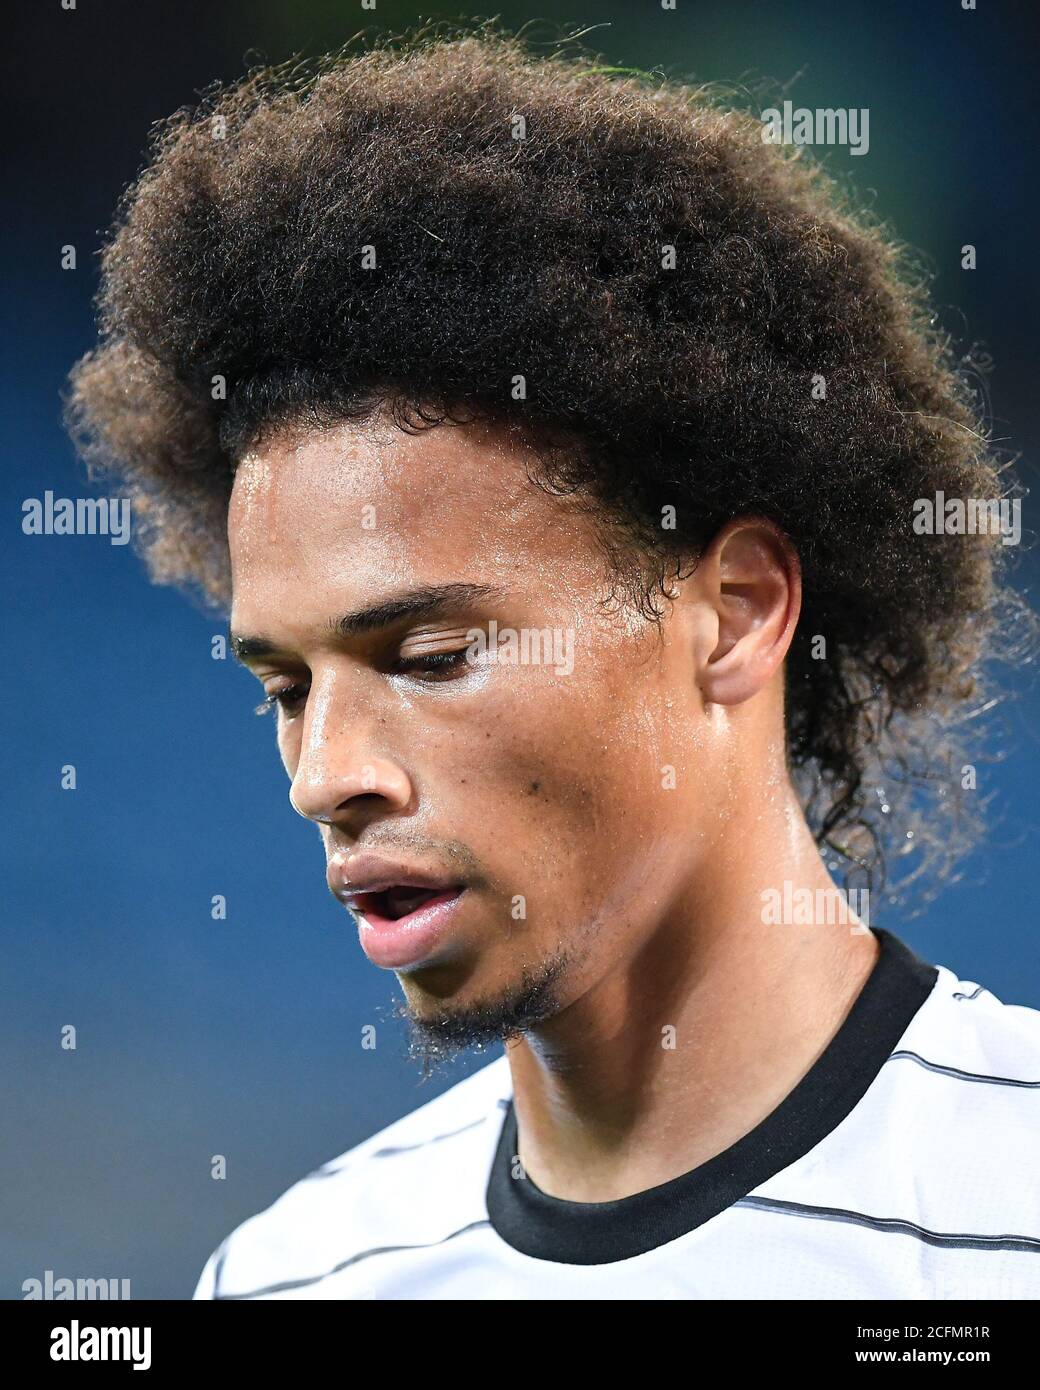 Basel, Switzerland. 06th Sep, 2020. Leroy SANE (GER), Enttaeuchung, frustrated, disappointed, frustratedriert, dejected, action, single image, trimmed single motif, portrait, portrait, portrait. Football international match, UEFA Nations League Division A, 2020/2021, group 4.2.matchday. Switzerland (SUI) -Germany (GER) on September 6th, 2020 in Basel/Switzerland. Photo: Markus Giliar/GES/POOL via SVEN SIMON Fotoagentur GmbH & Co. Pressefoto KG # Prinzess-Luise-Str. 41 # 45479 M uelheim/R uhr # Tel. 0208/9413250 # Fax. 0208/9413260 # GLS Bank # BLZ 430 609 67 # Account 4030 025 100 # IBAN DE75  Stock Photo